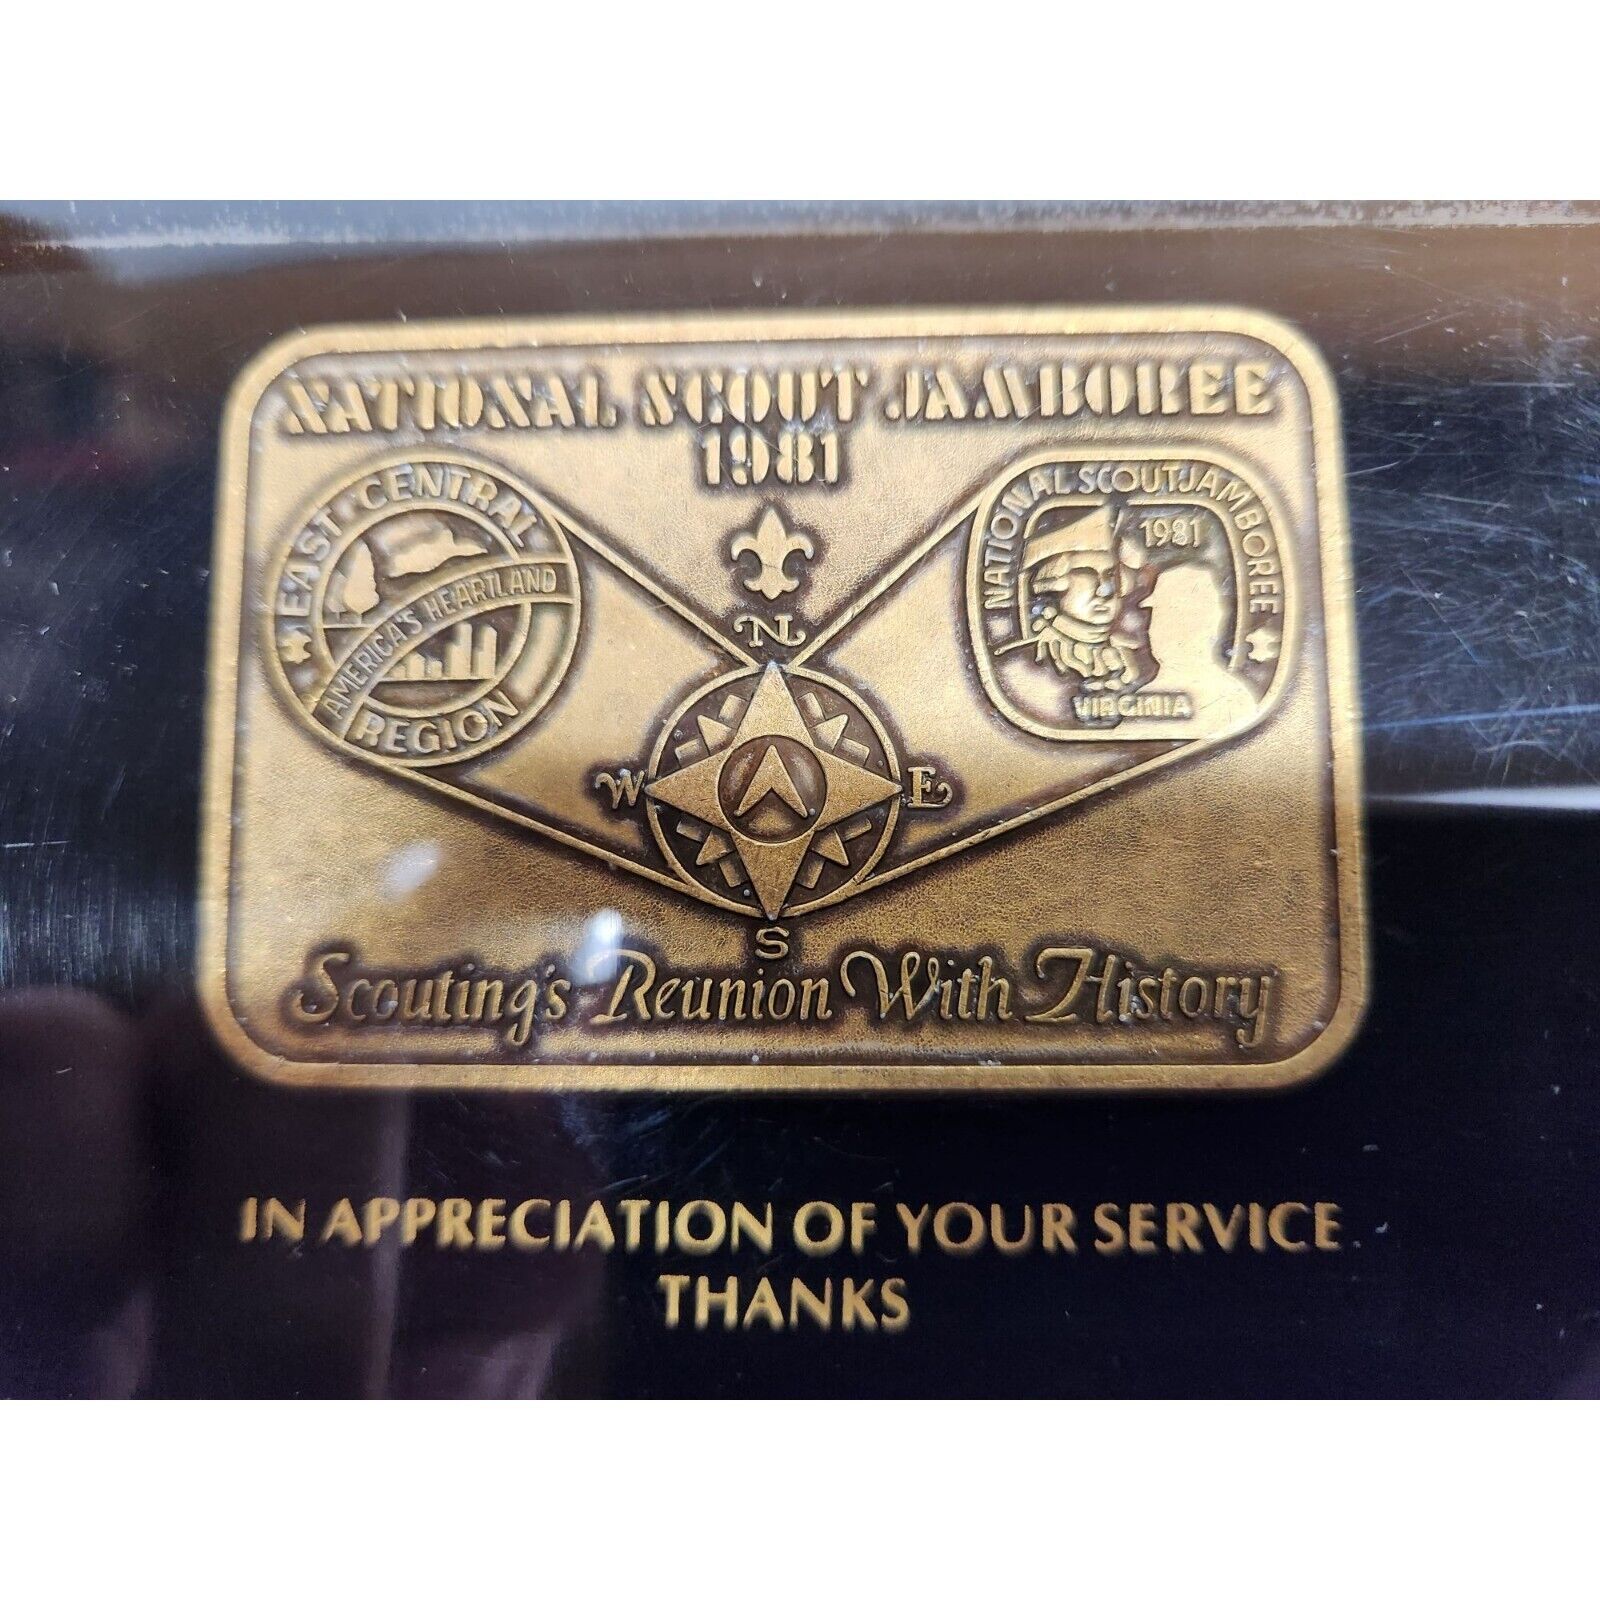 1981 National Scout Jamboree Thank You Paperweight